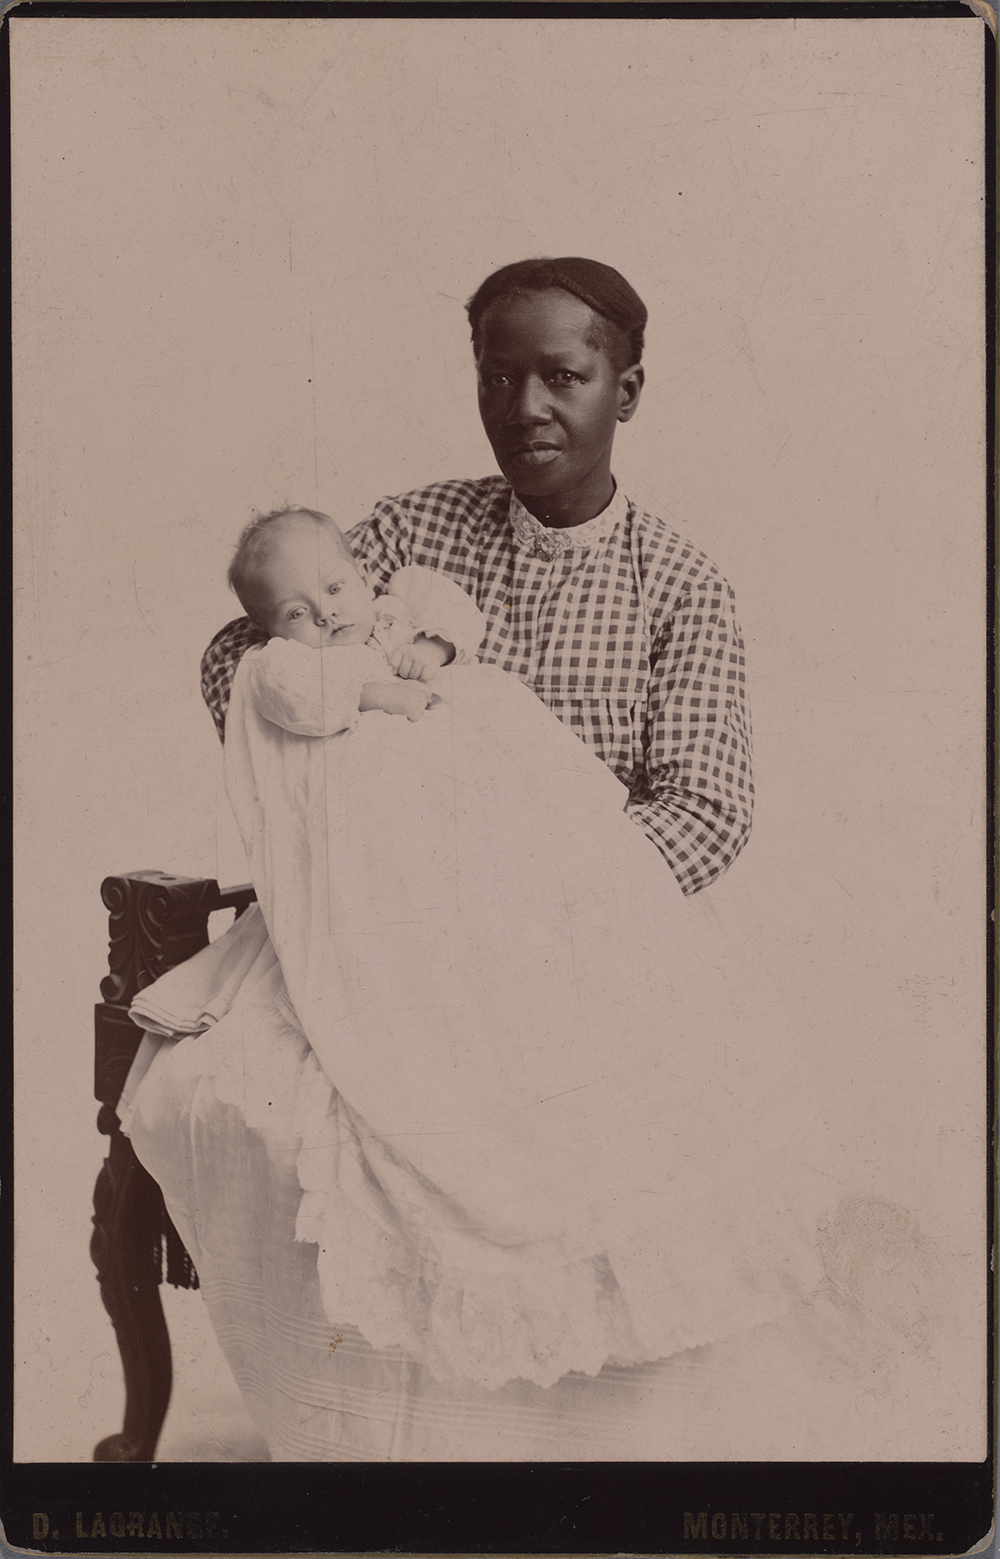 Photograph of a Wet Nurse of African Descent with braided hair and a checkered shirt holding a white infant in a christening gown